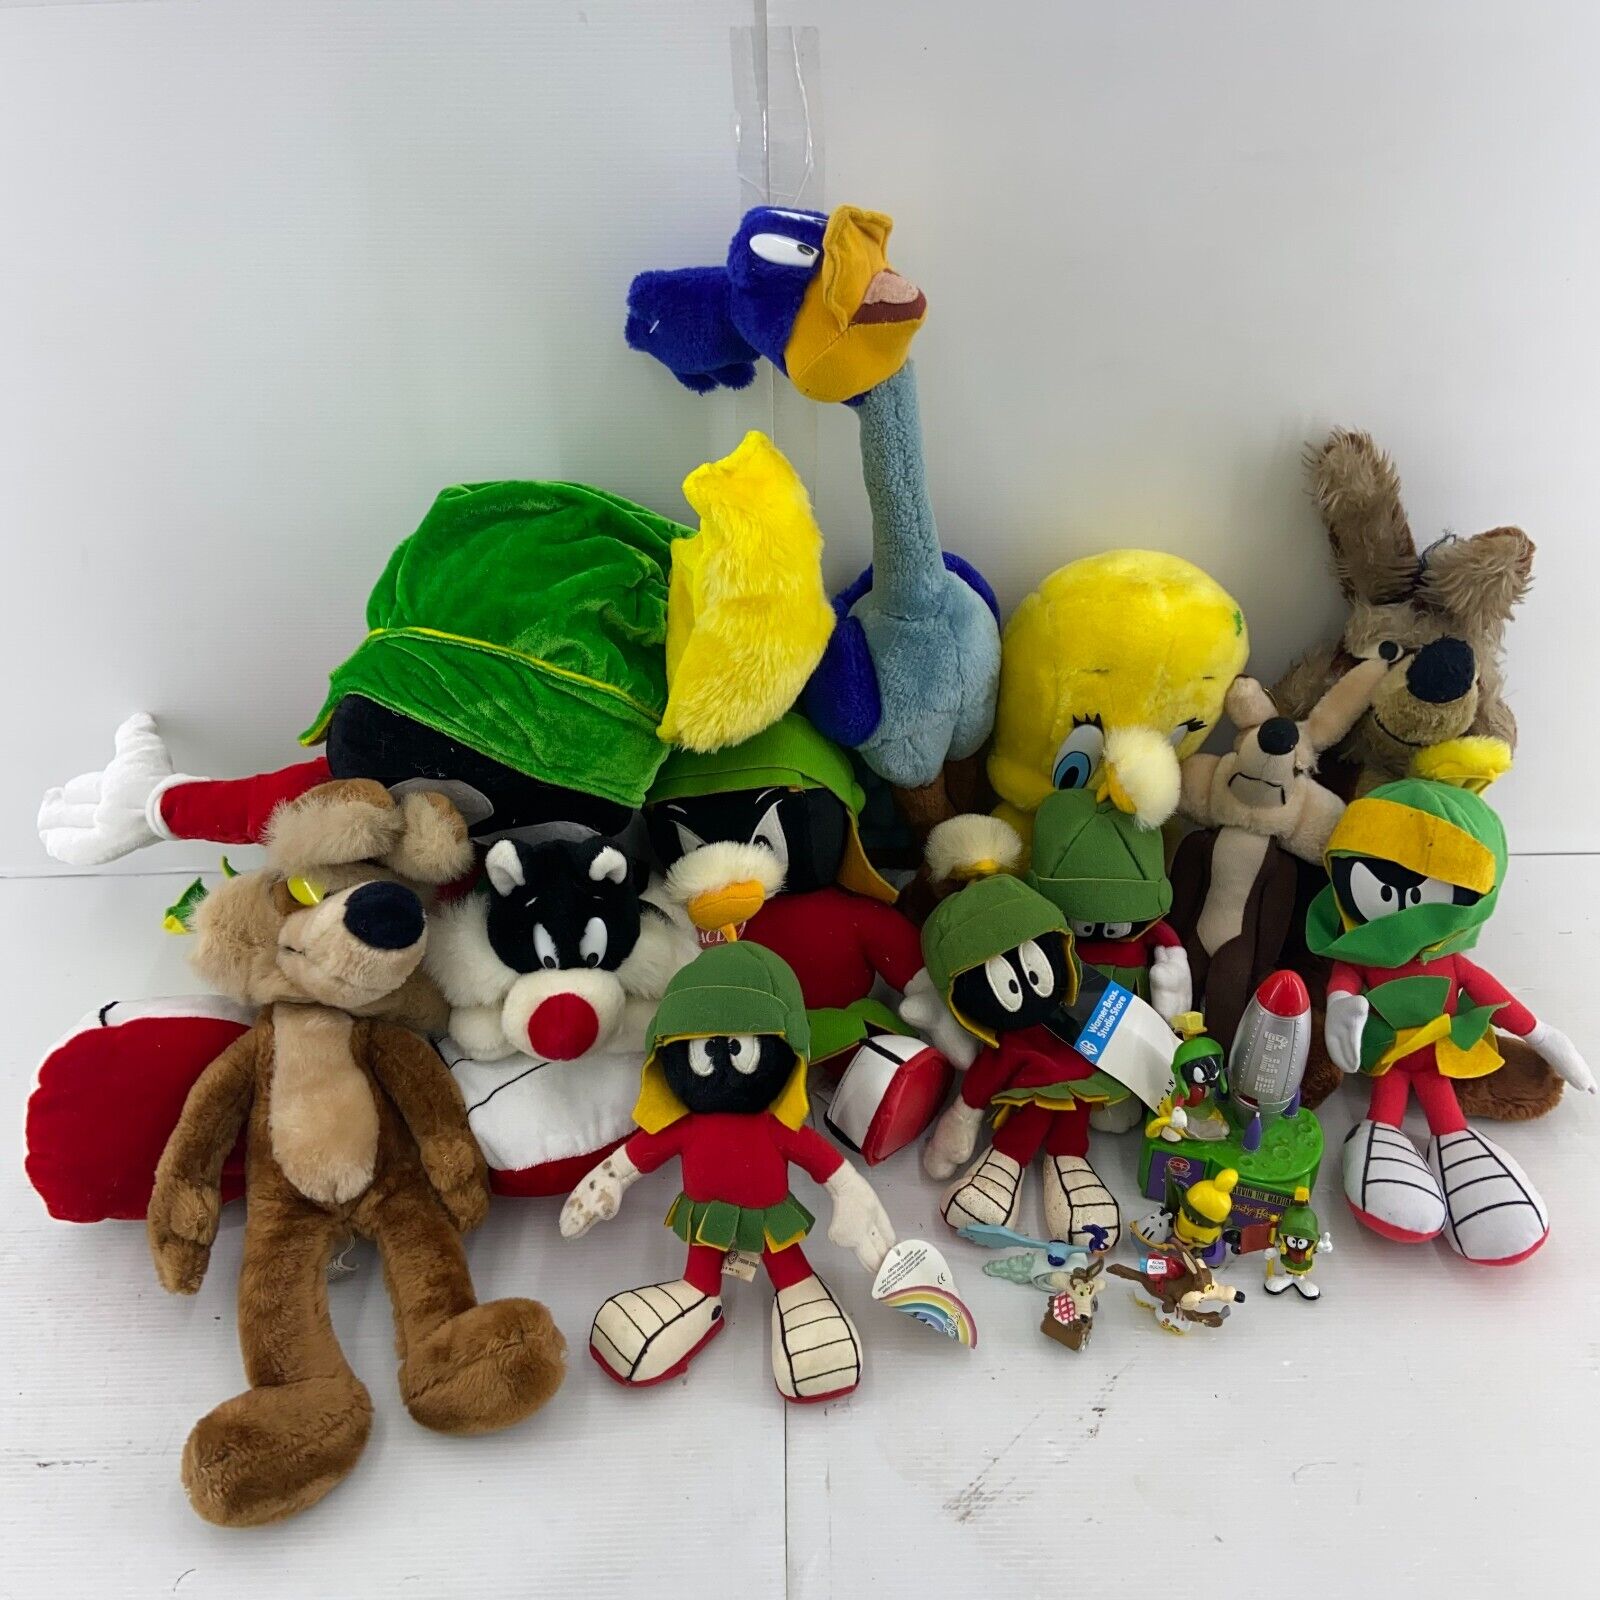 Mixed LOT of 20 ACME Looney Tunes Plush Toy Figures Marvin Martian Wile Coyote